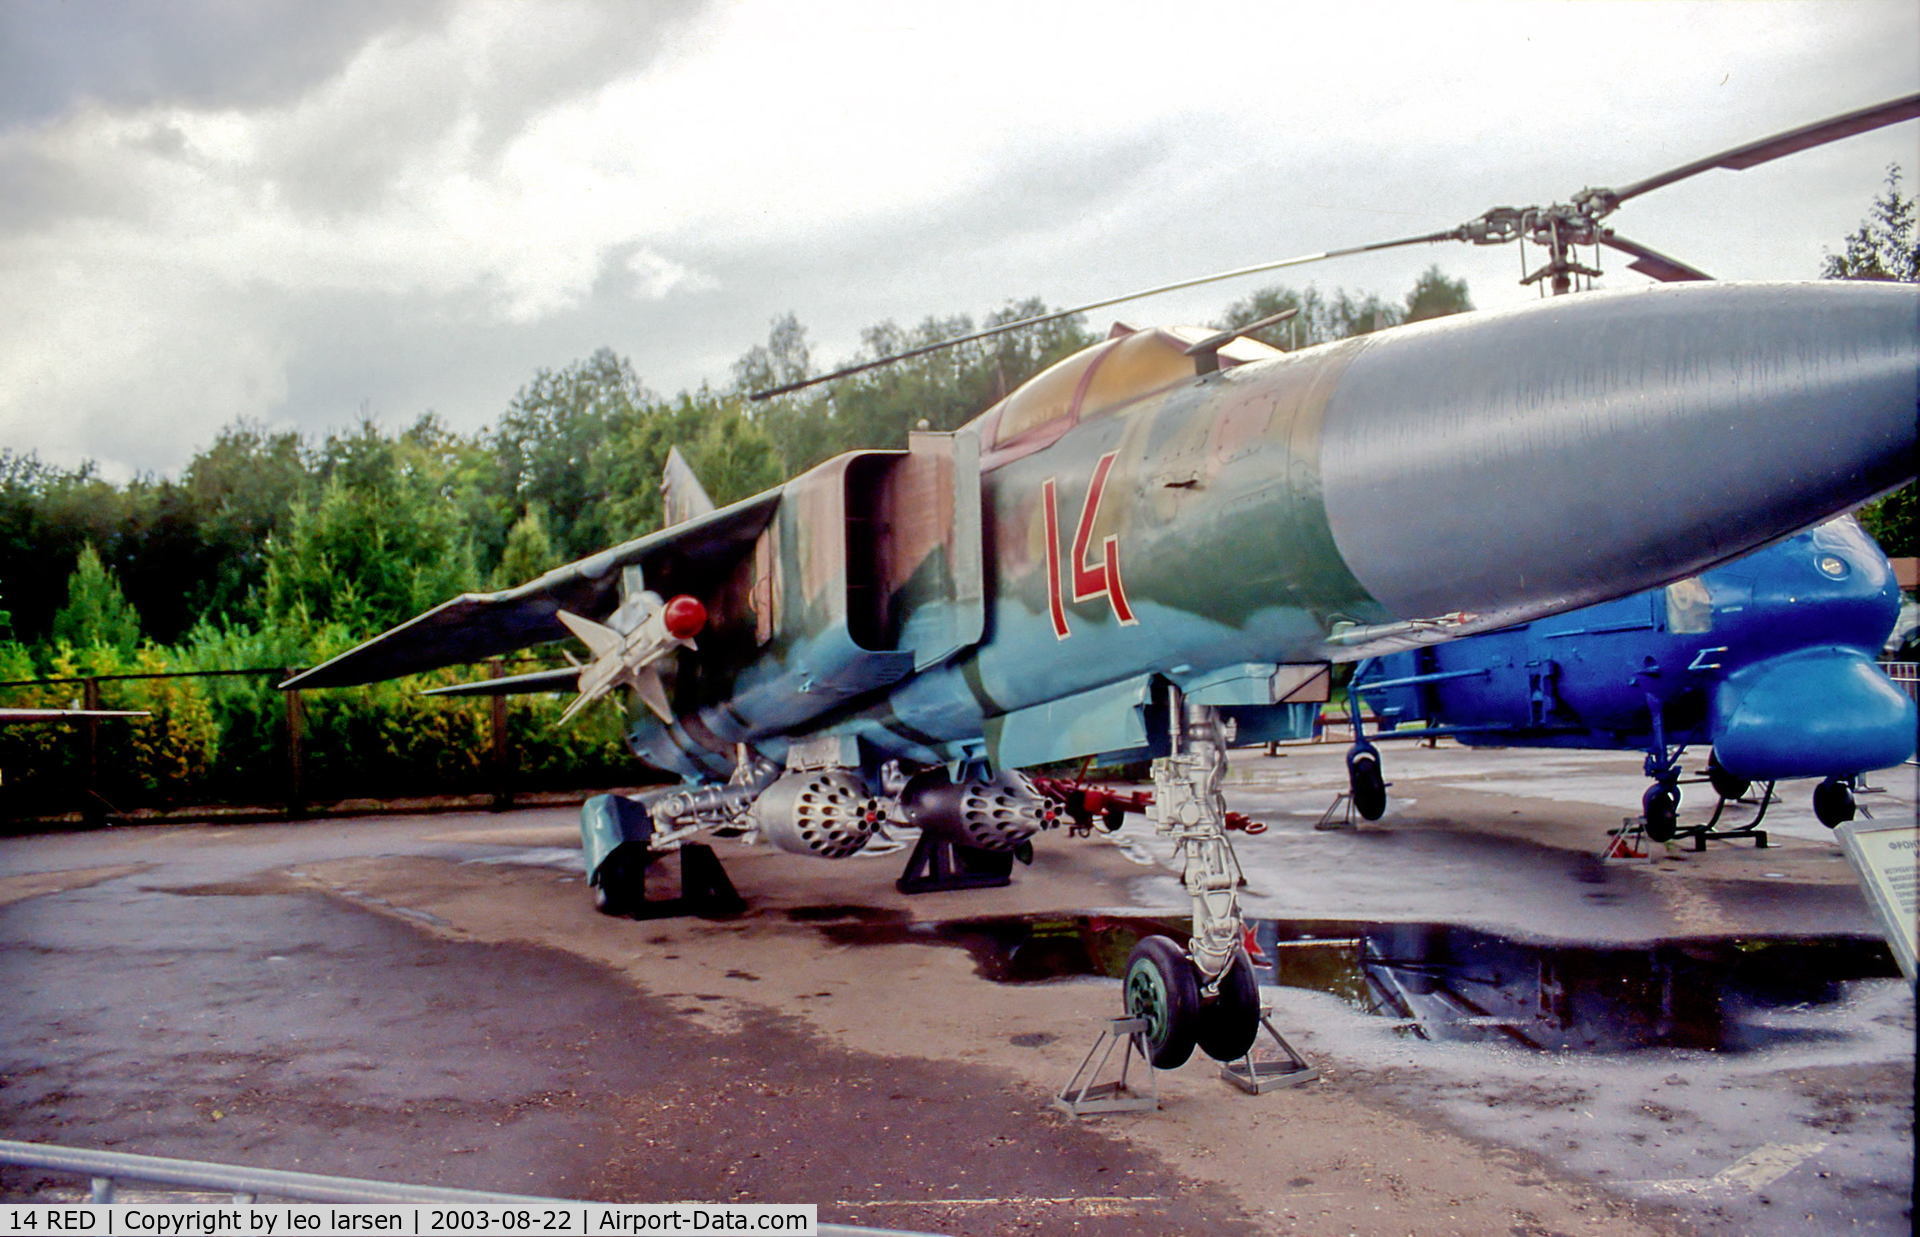 14 RED, 1973 Mikoyan-Gurevich MiG-23MF C/N 0390310225, Central museum of the great patriotic war 22.8.2003